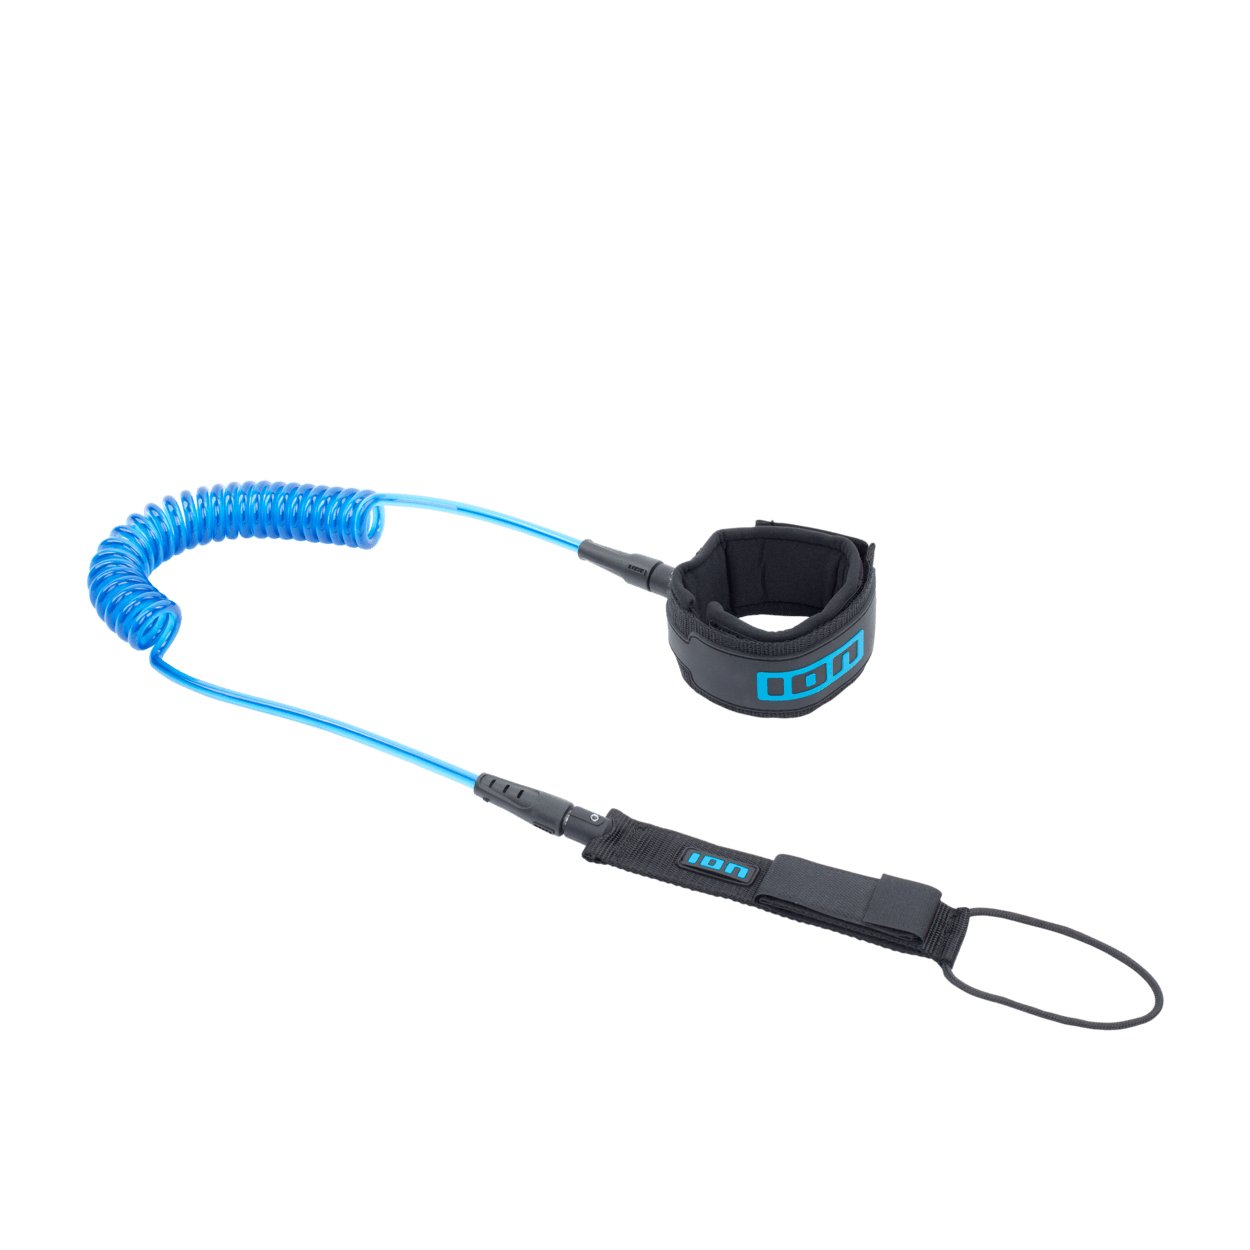 ION SUP Leash Core Coiled Ankle 2022 - Worthing Watersports - 9008415964895 - Accessories - ION Water